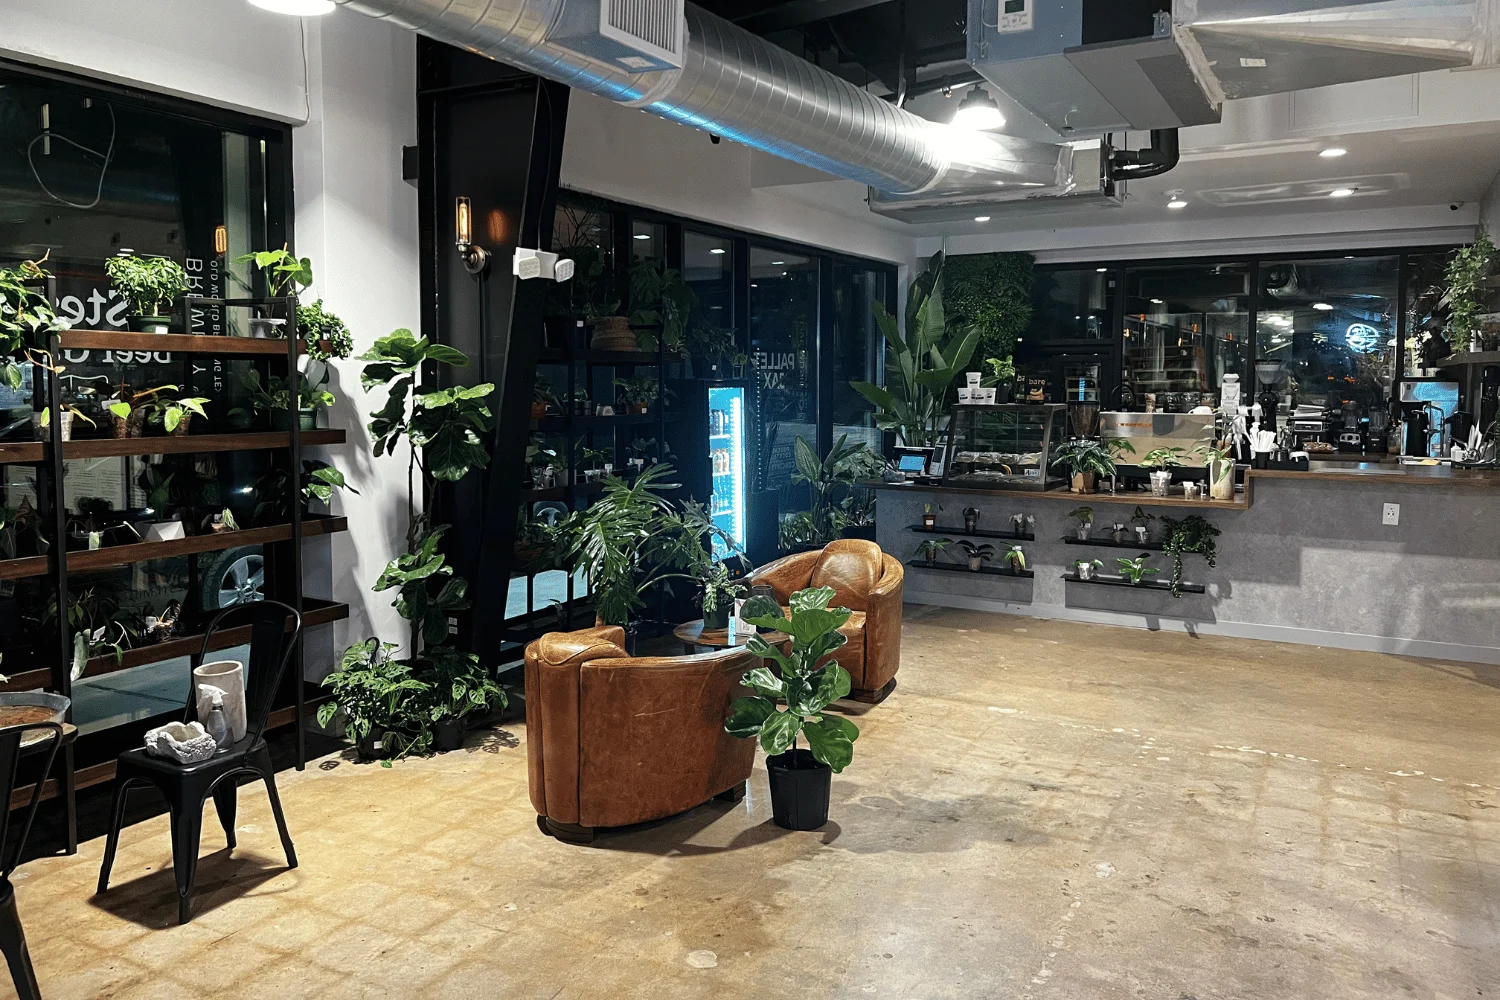 Dig The Vibes At This Cute Plant + Coffee Shop In Houston - Secret Houston